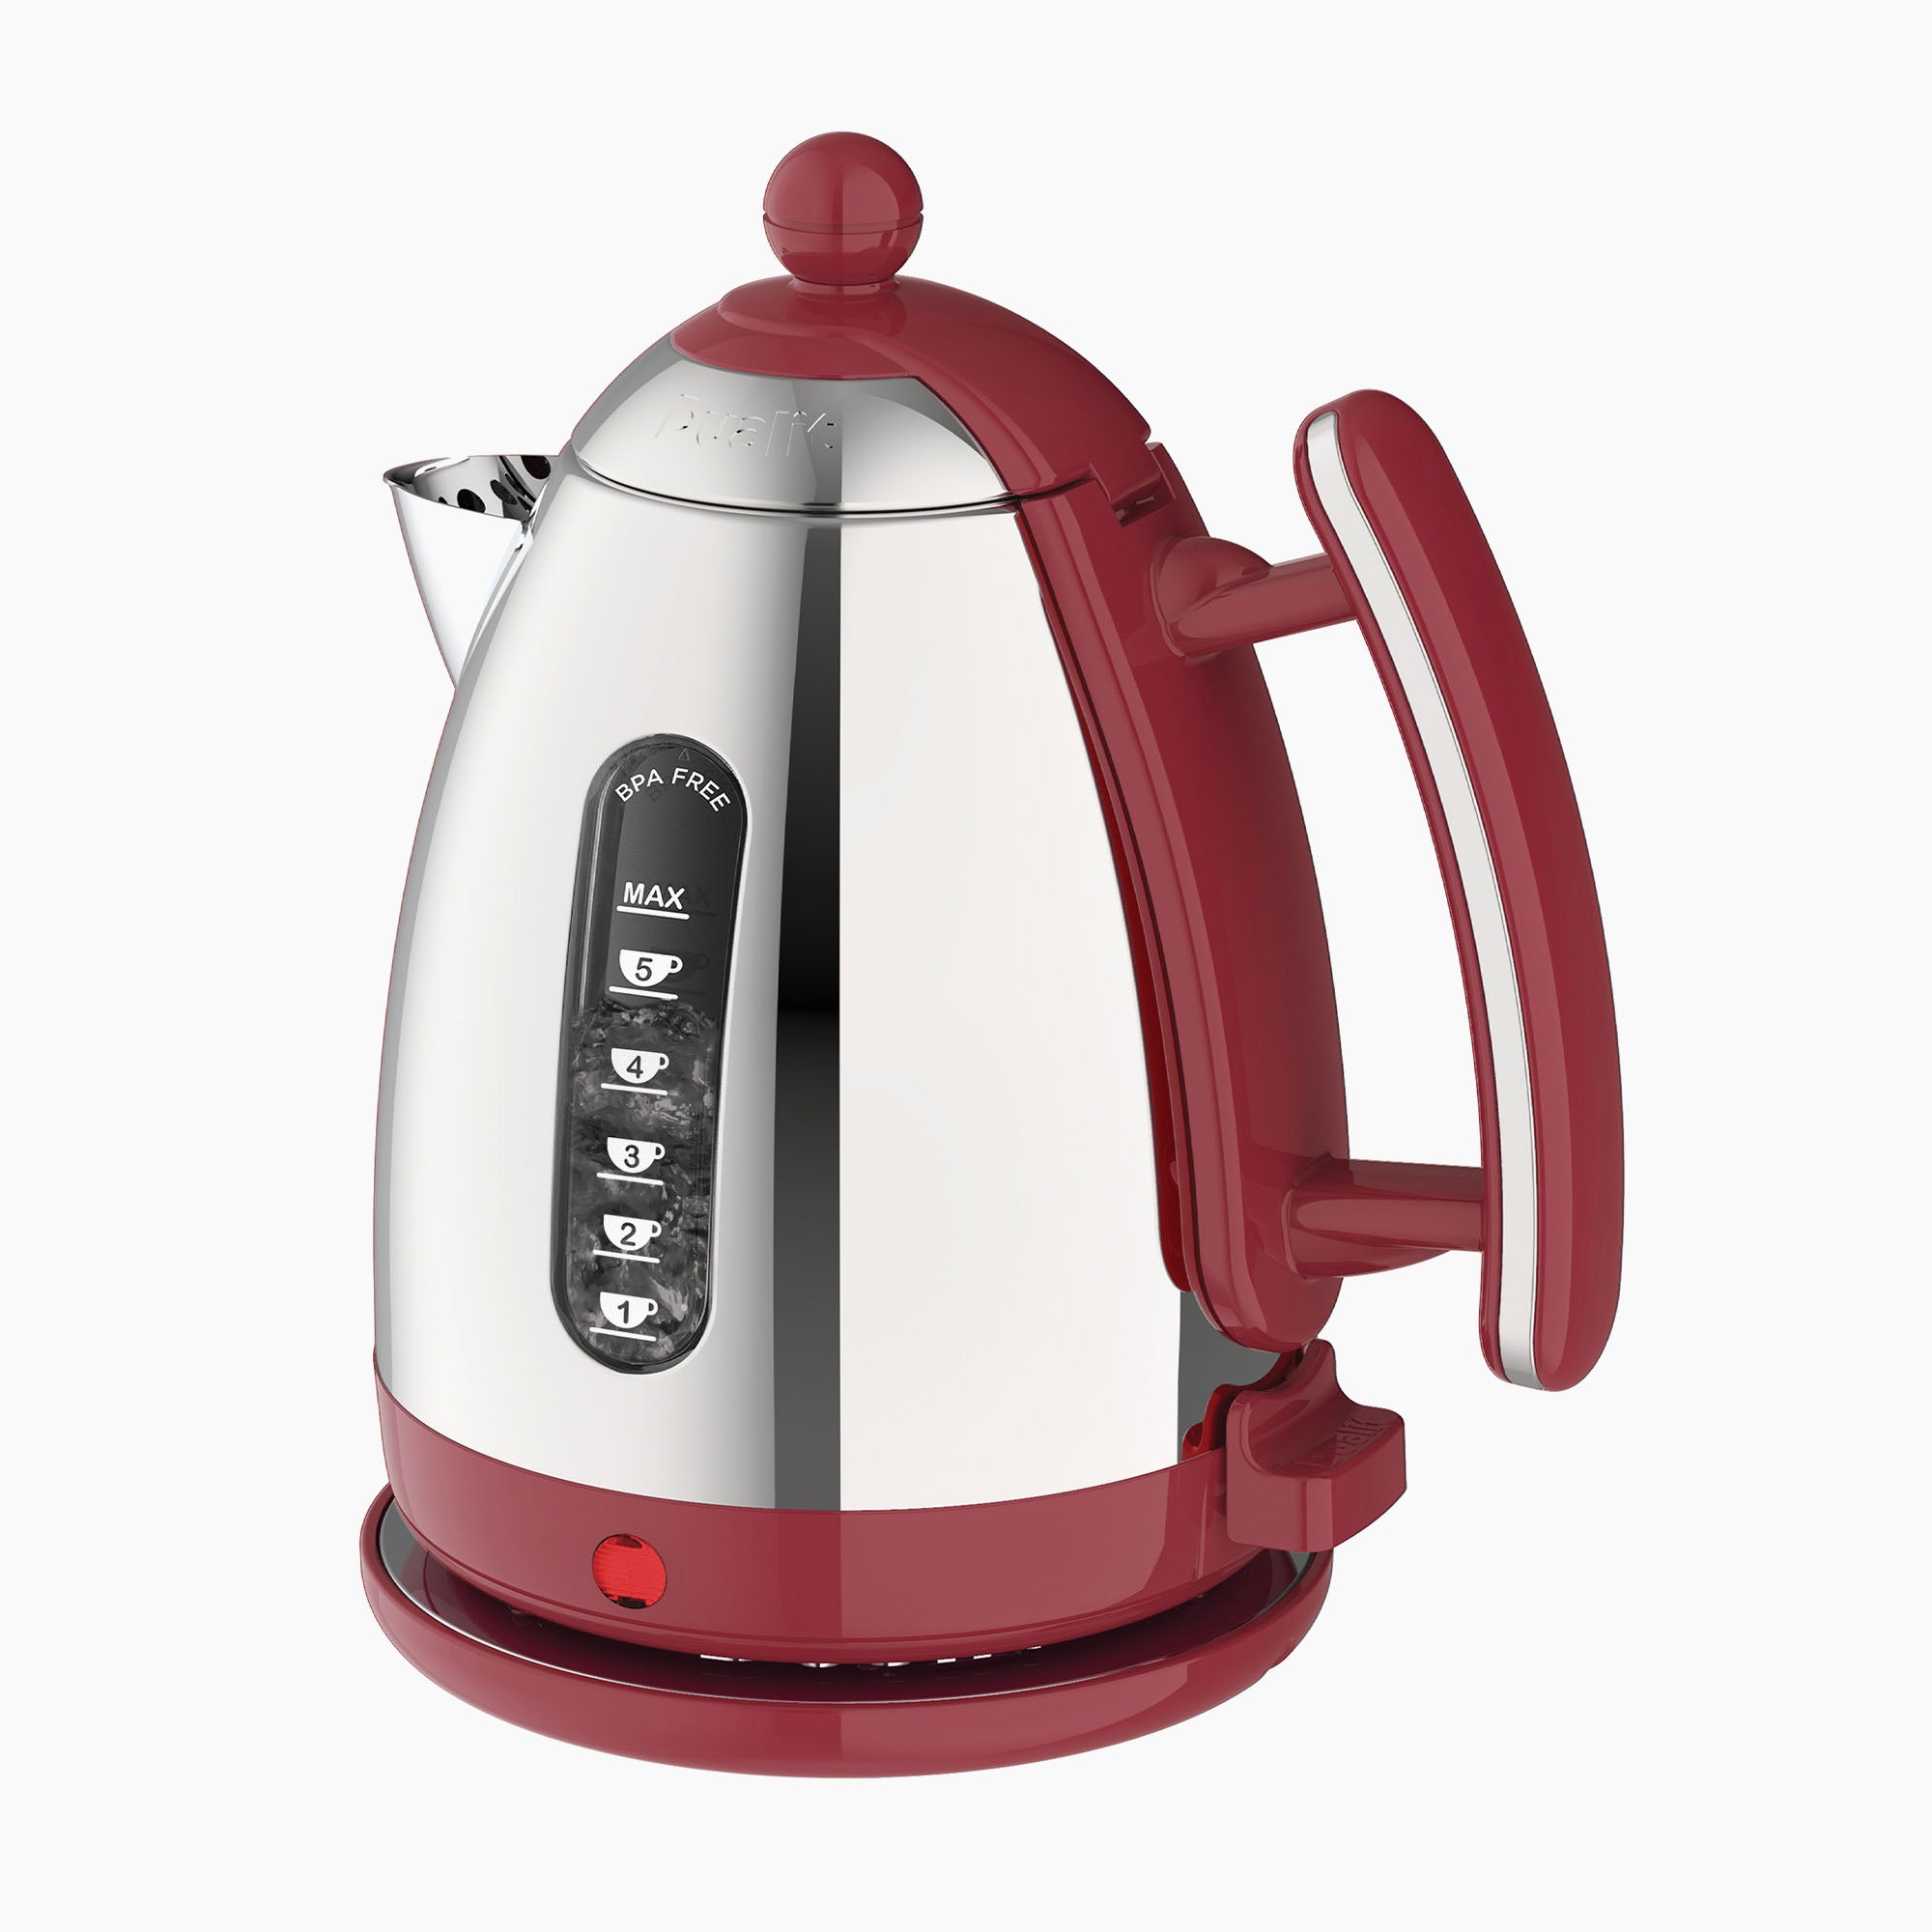 1.5 Litre Dualit Lite Kettle Price:135k As stylish as it is functional,  Dualit's Lite Kettle is an easy to use, upright kettle with a…